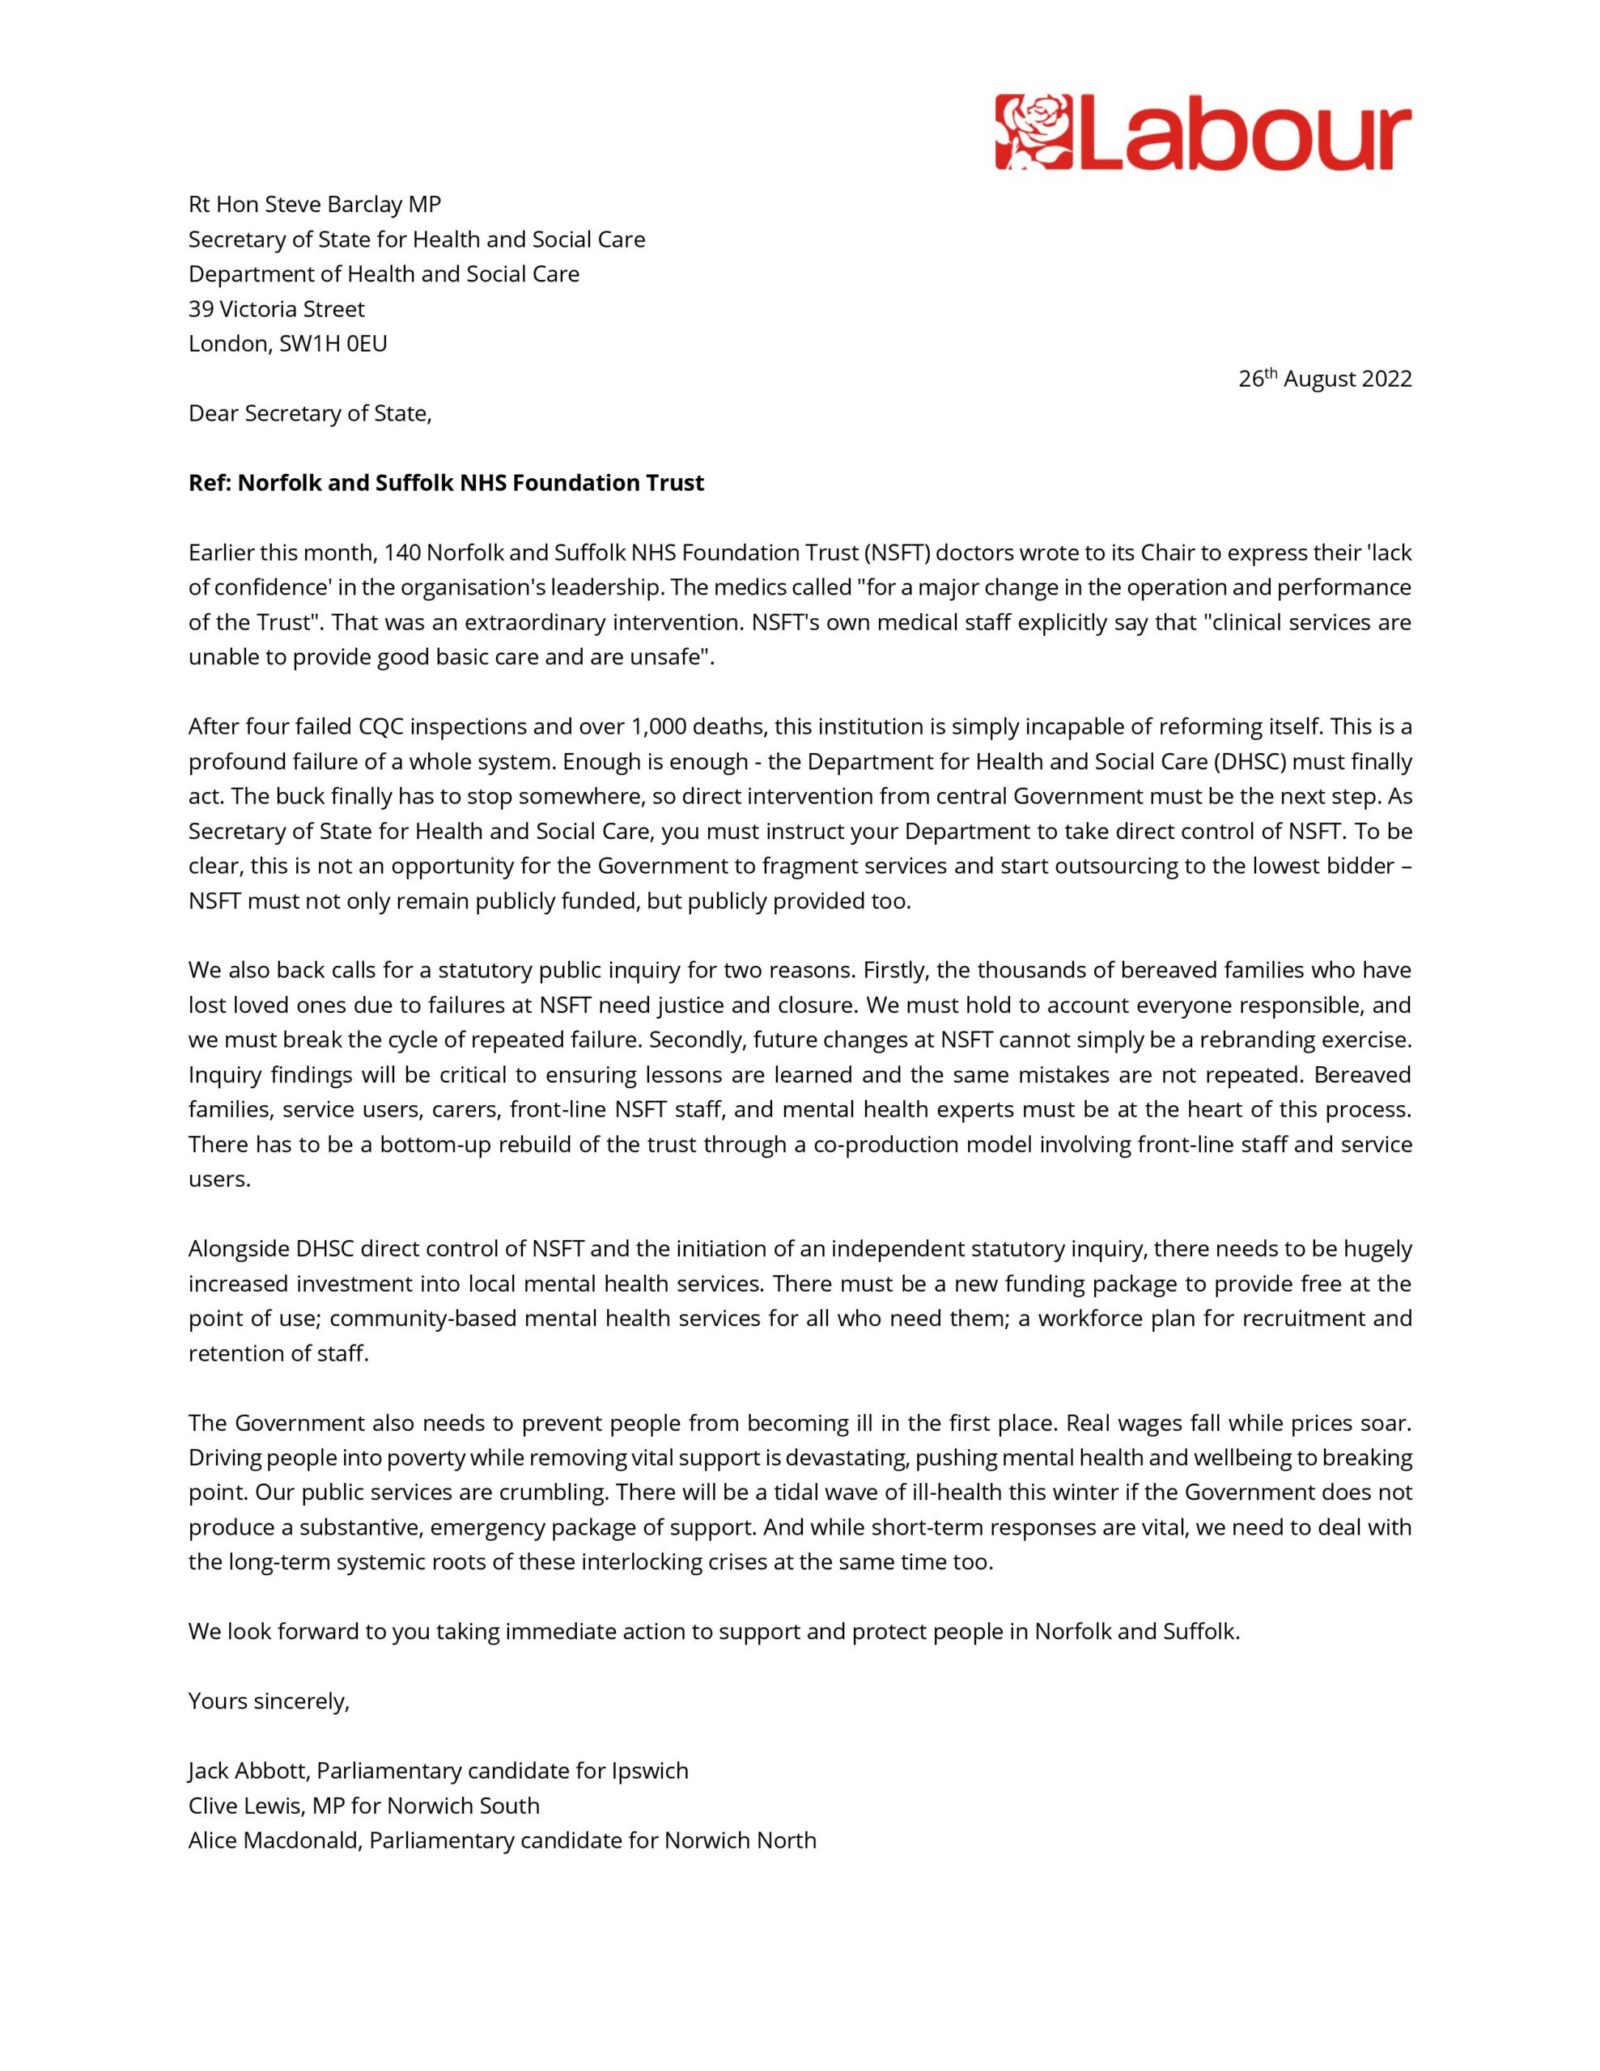 Letter to the Secretary of State for Health and Social Care re the Norfolk and Suffolk NHS Foundation Trust